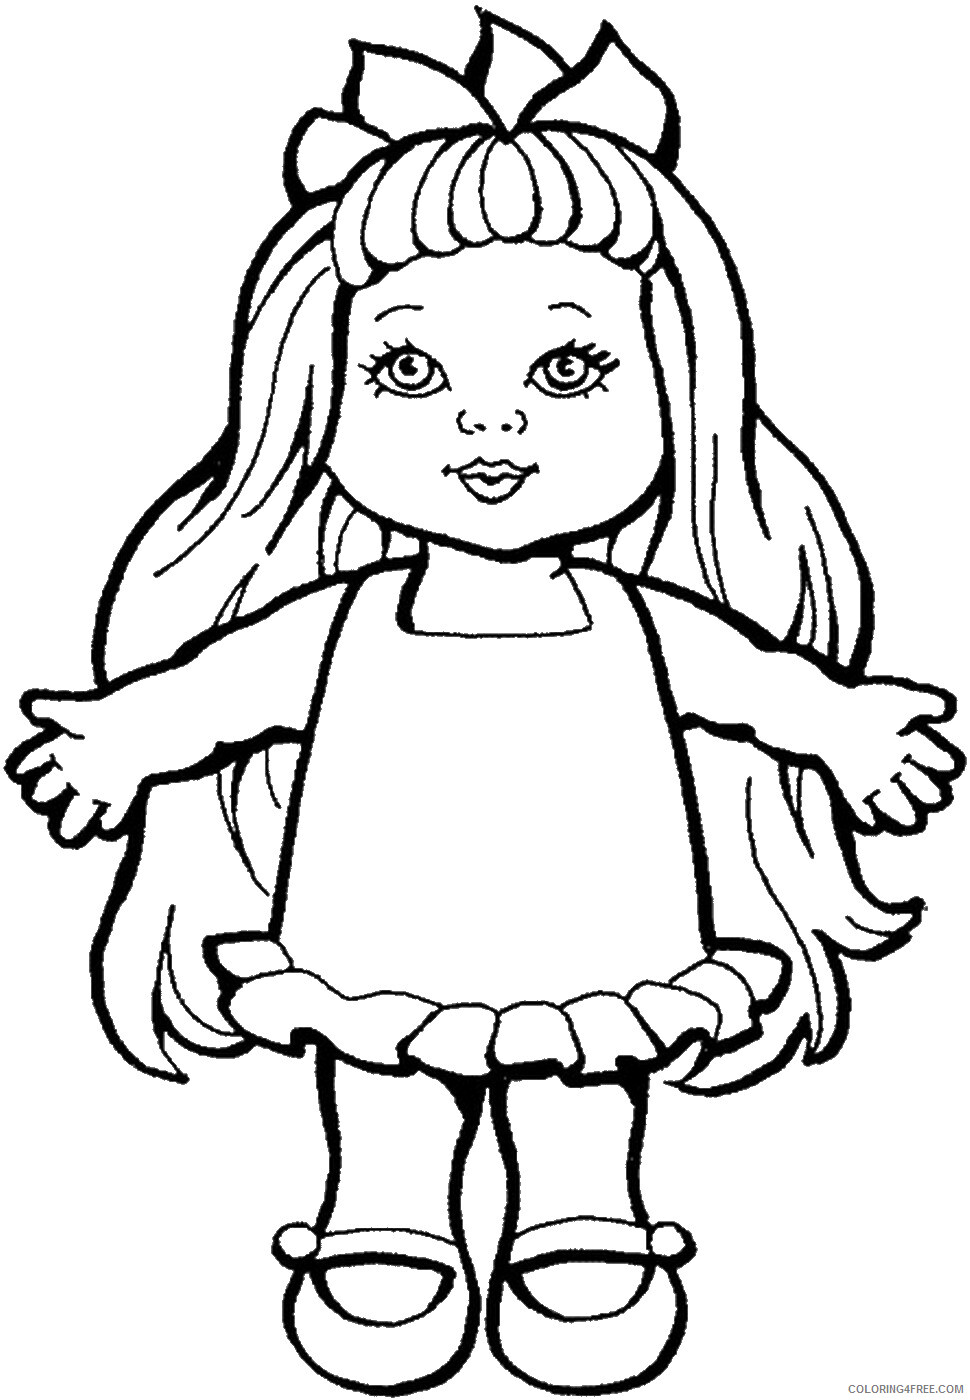 Doll Coloring Pages for Girls dolls_31 Printable 2021 0382 Coloring4free